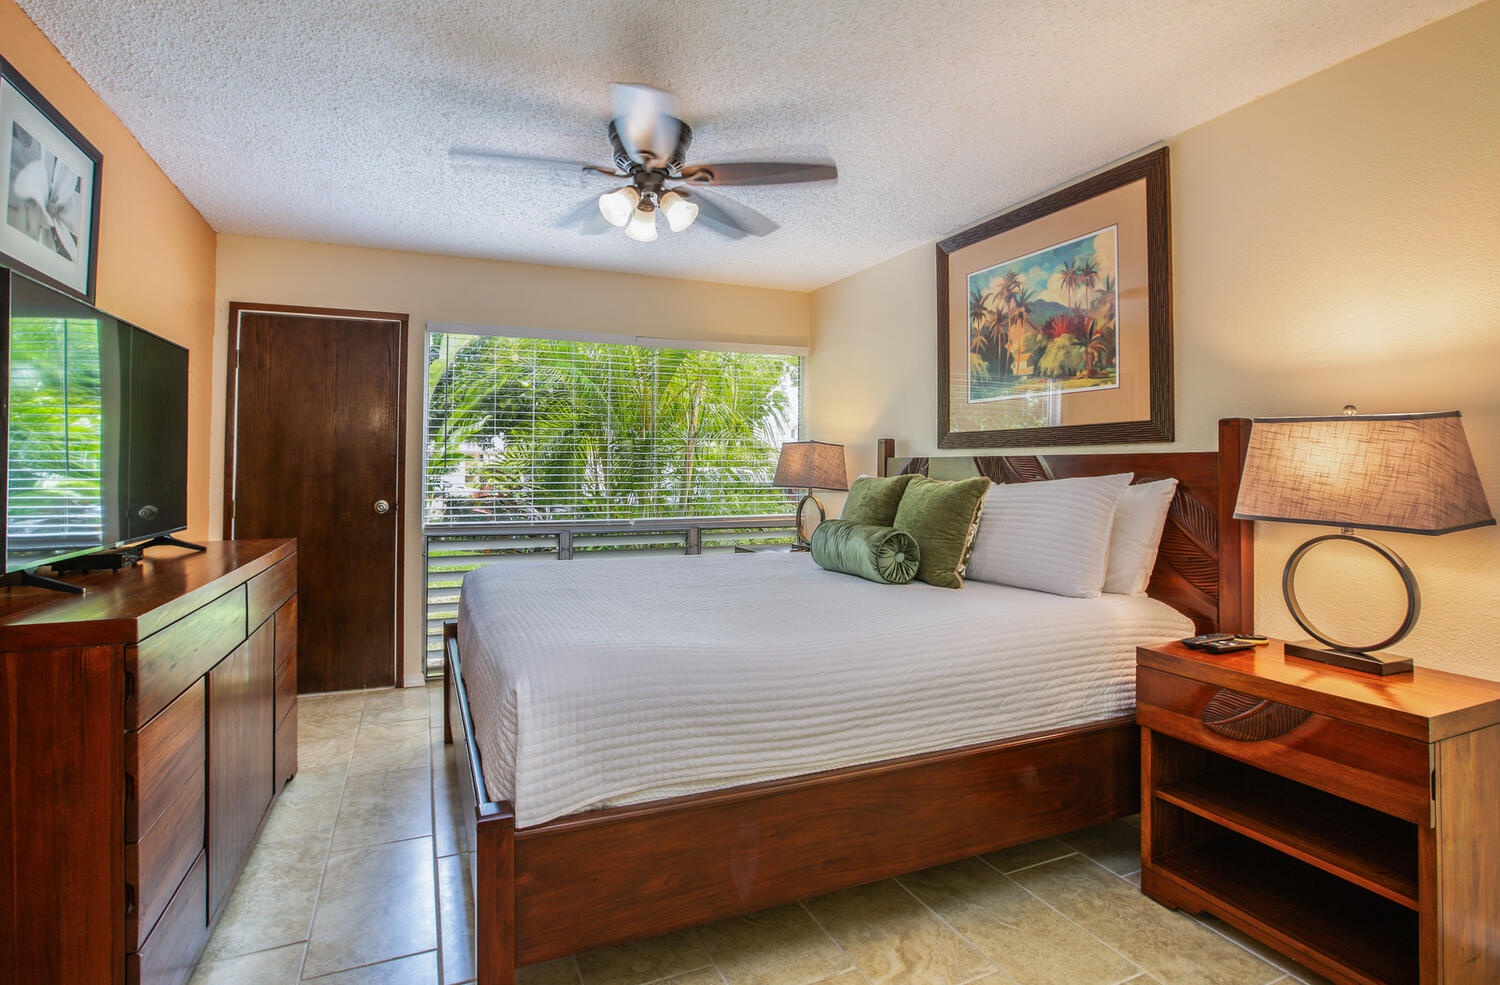 Princeville Vacation Rentals, Hideaway Haven - The primary suite offers a plush queen bed with access to the lanai